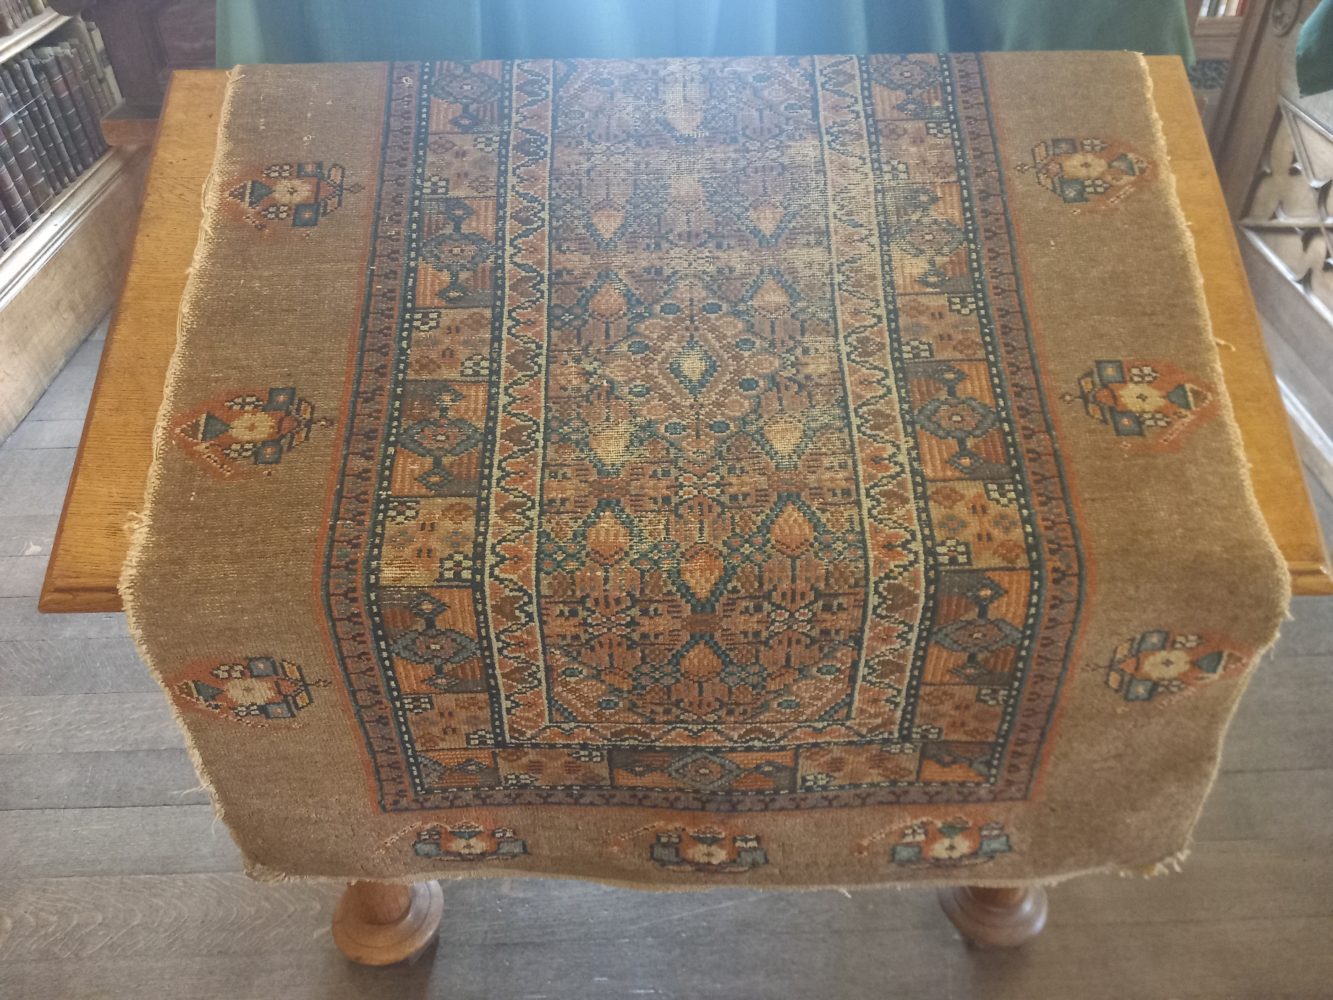 Rug owned by T.E. Lawrence. Donated to Magdalen College by Nicolas Barker.